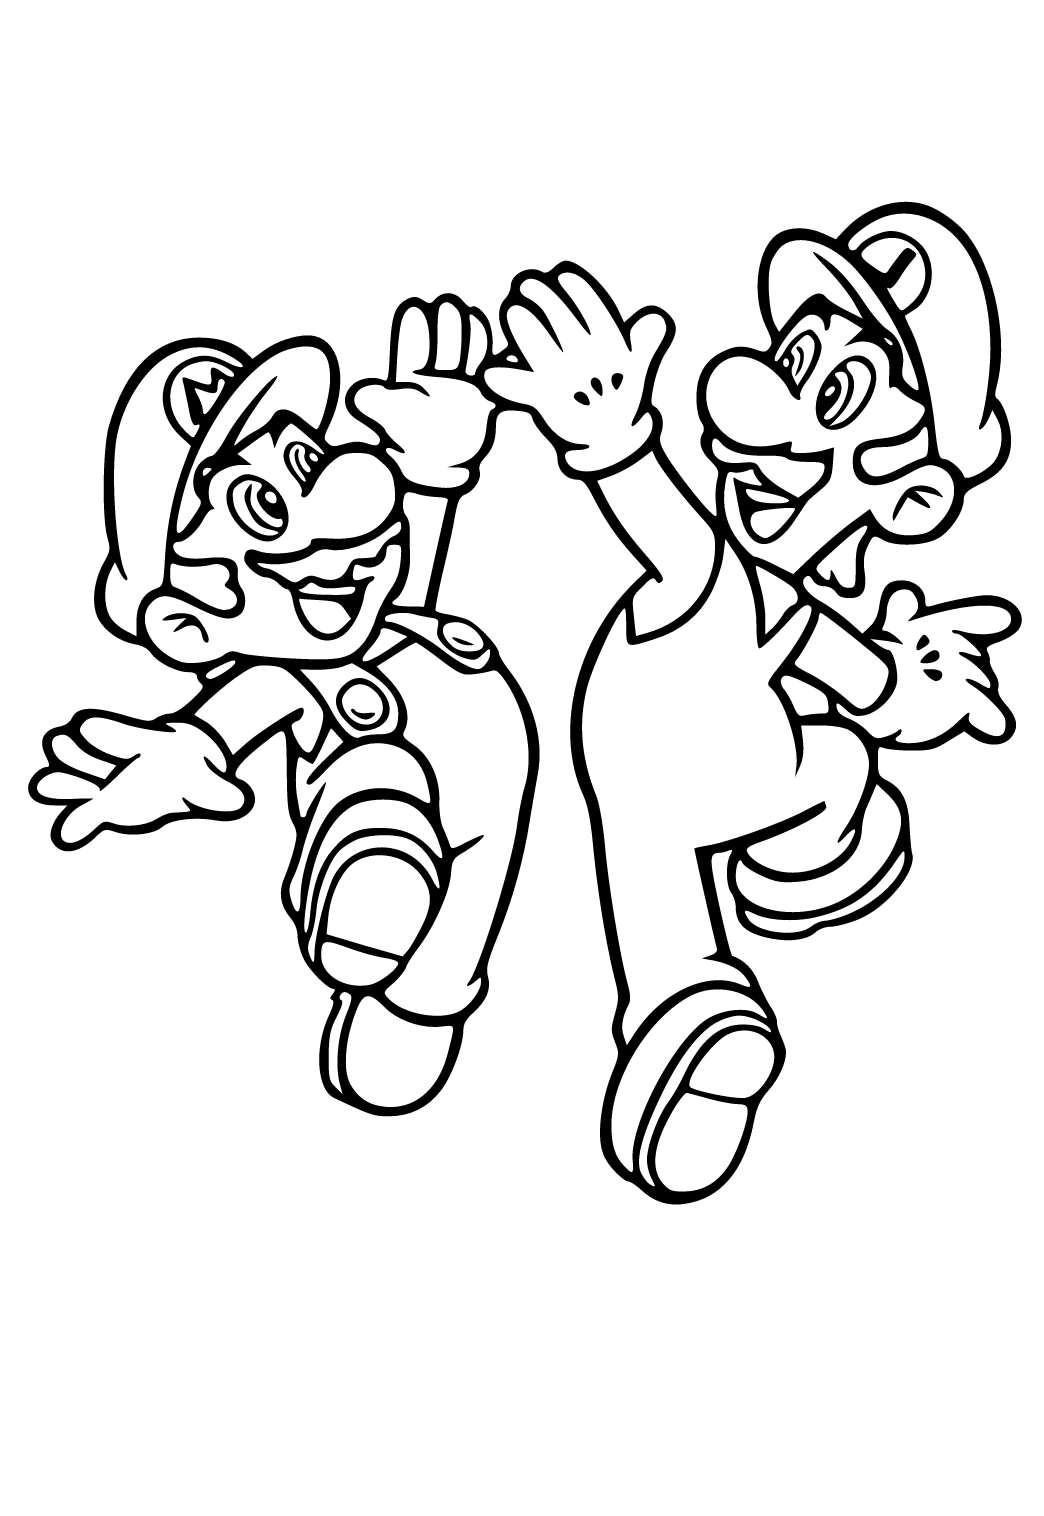 Free printable luigi friends coloring page for adults and kids